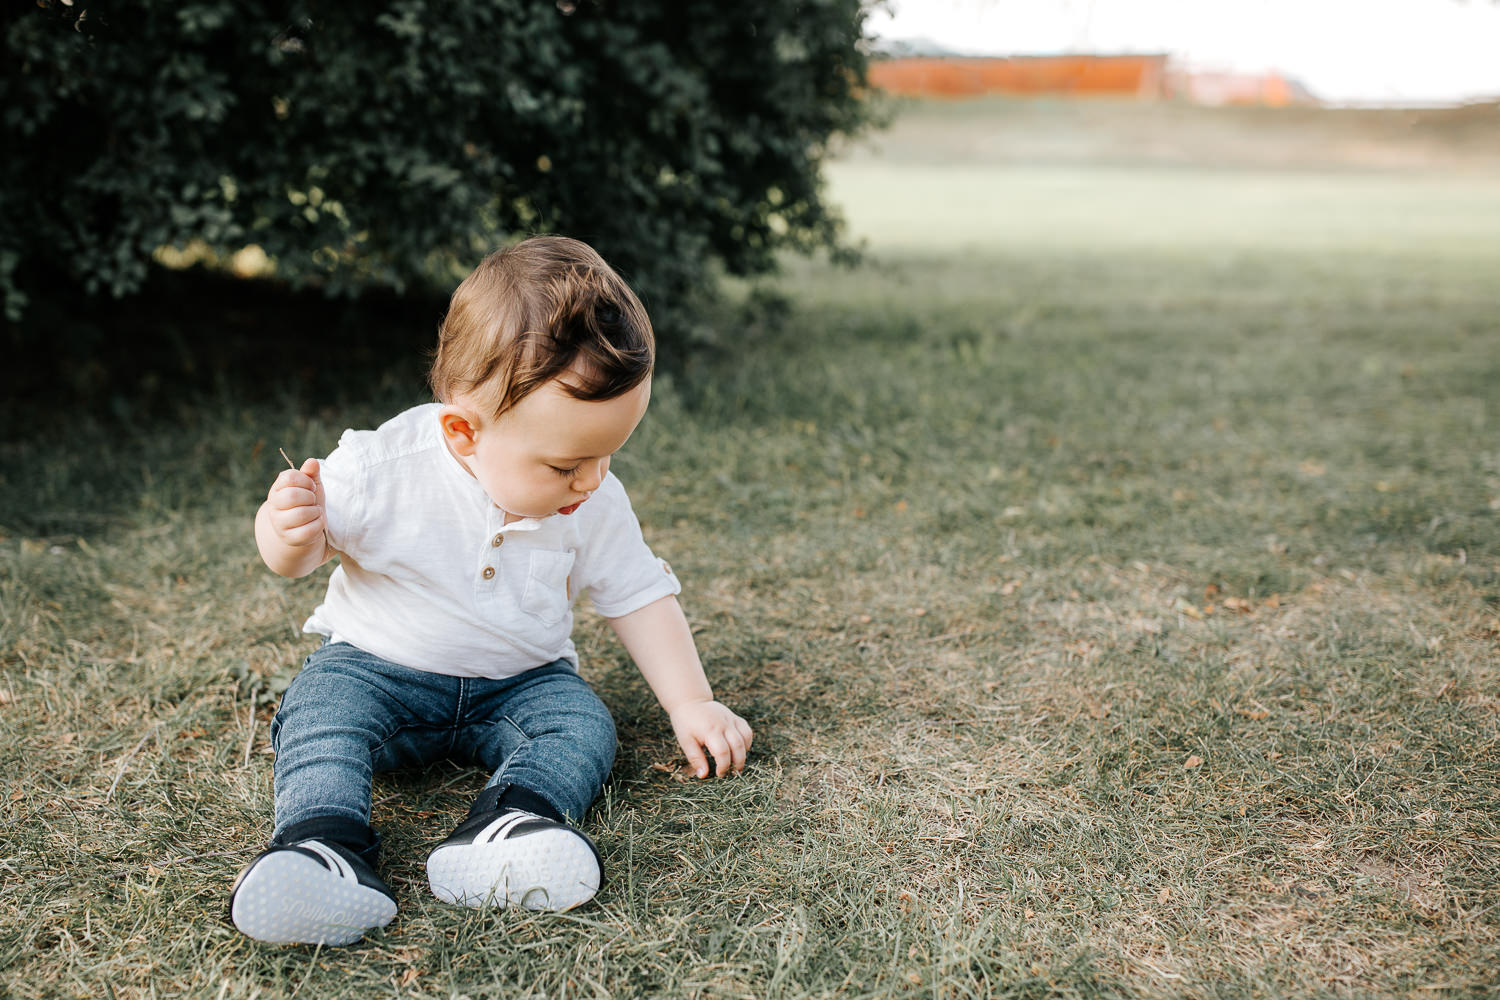 9 month old baby boy wearing white t-shirt, jeans and sneakers sitting on grass at park in front of greenery playing with leaves, looking down - Barrie Golden Hour Photos